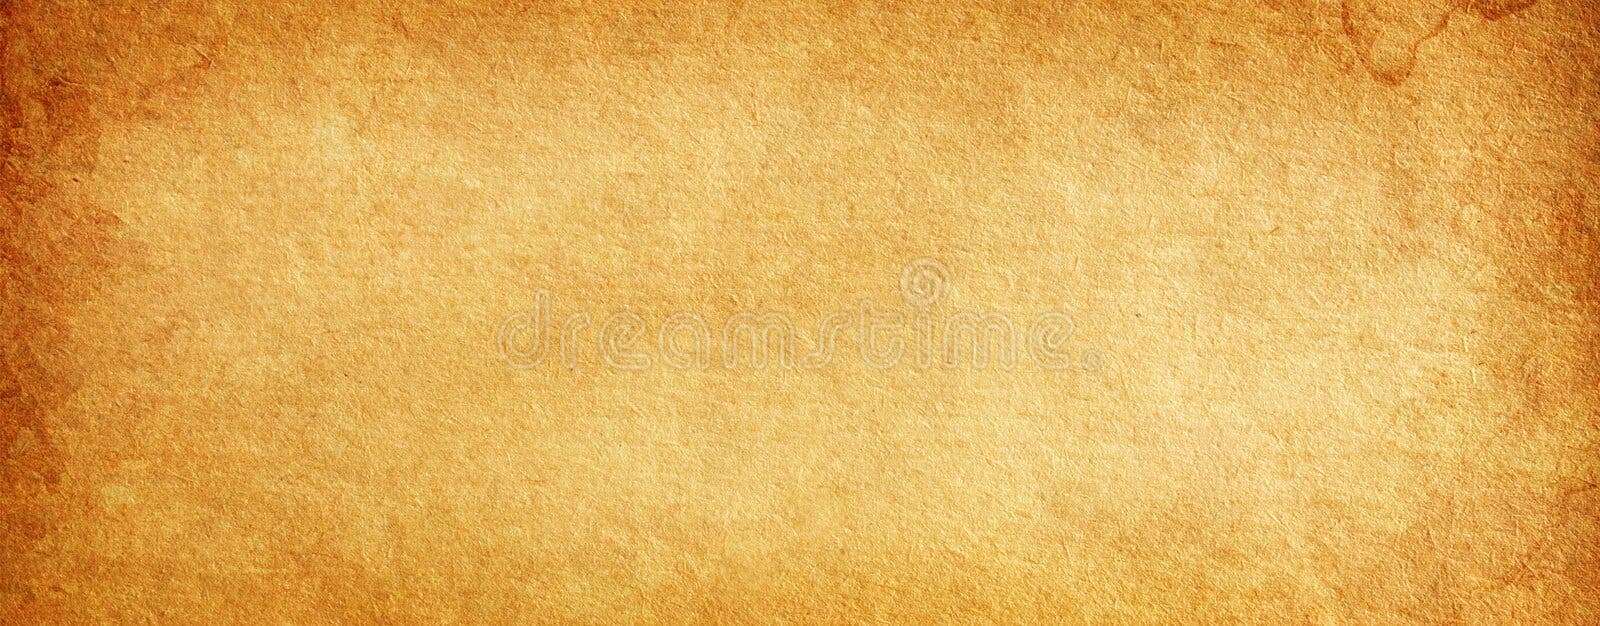 https://thumbs.dreamstime.com/b/abstract-vintage-texture-background-design-wall-old-wallpaper-background-material-paper-retro-antique-ancient-parchment-art-empty-190619496.jpg?w=1600